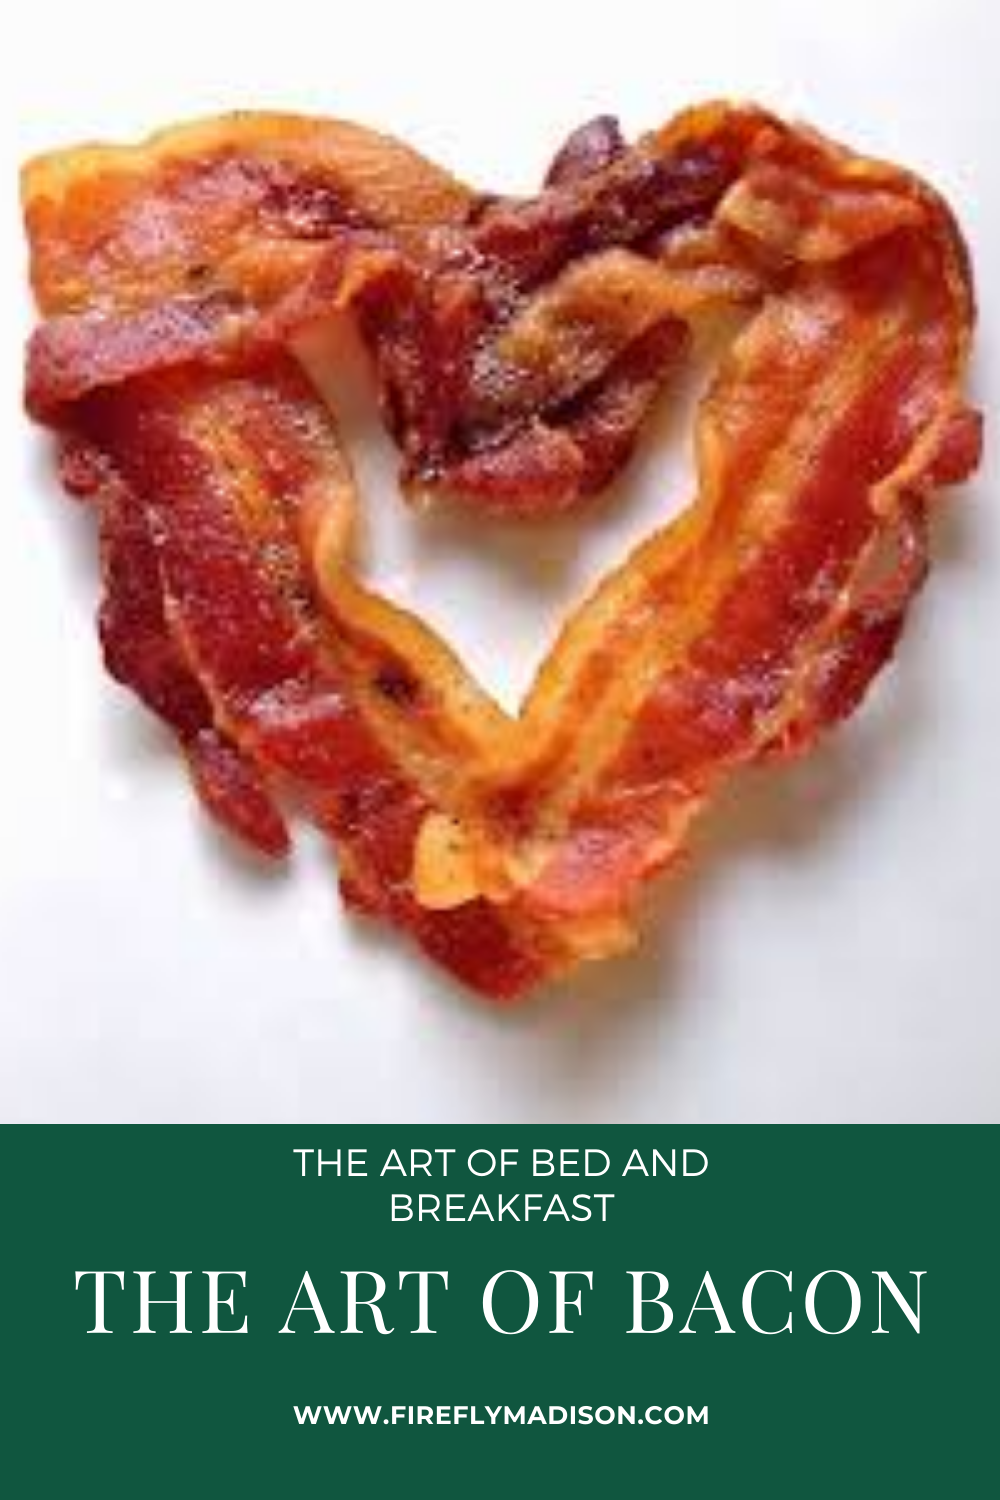 The Art of Bacon (and Sausage)